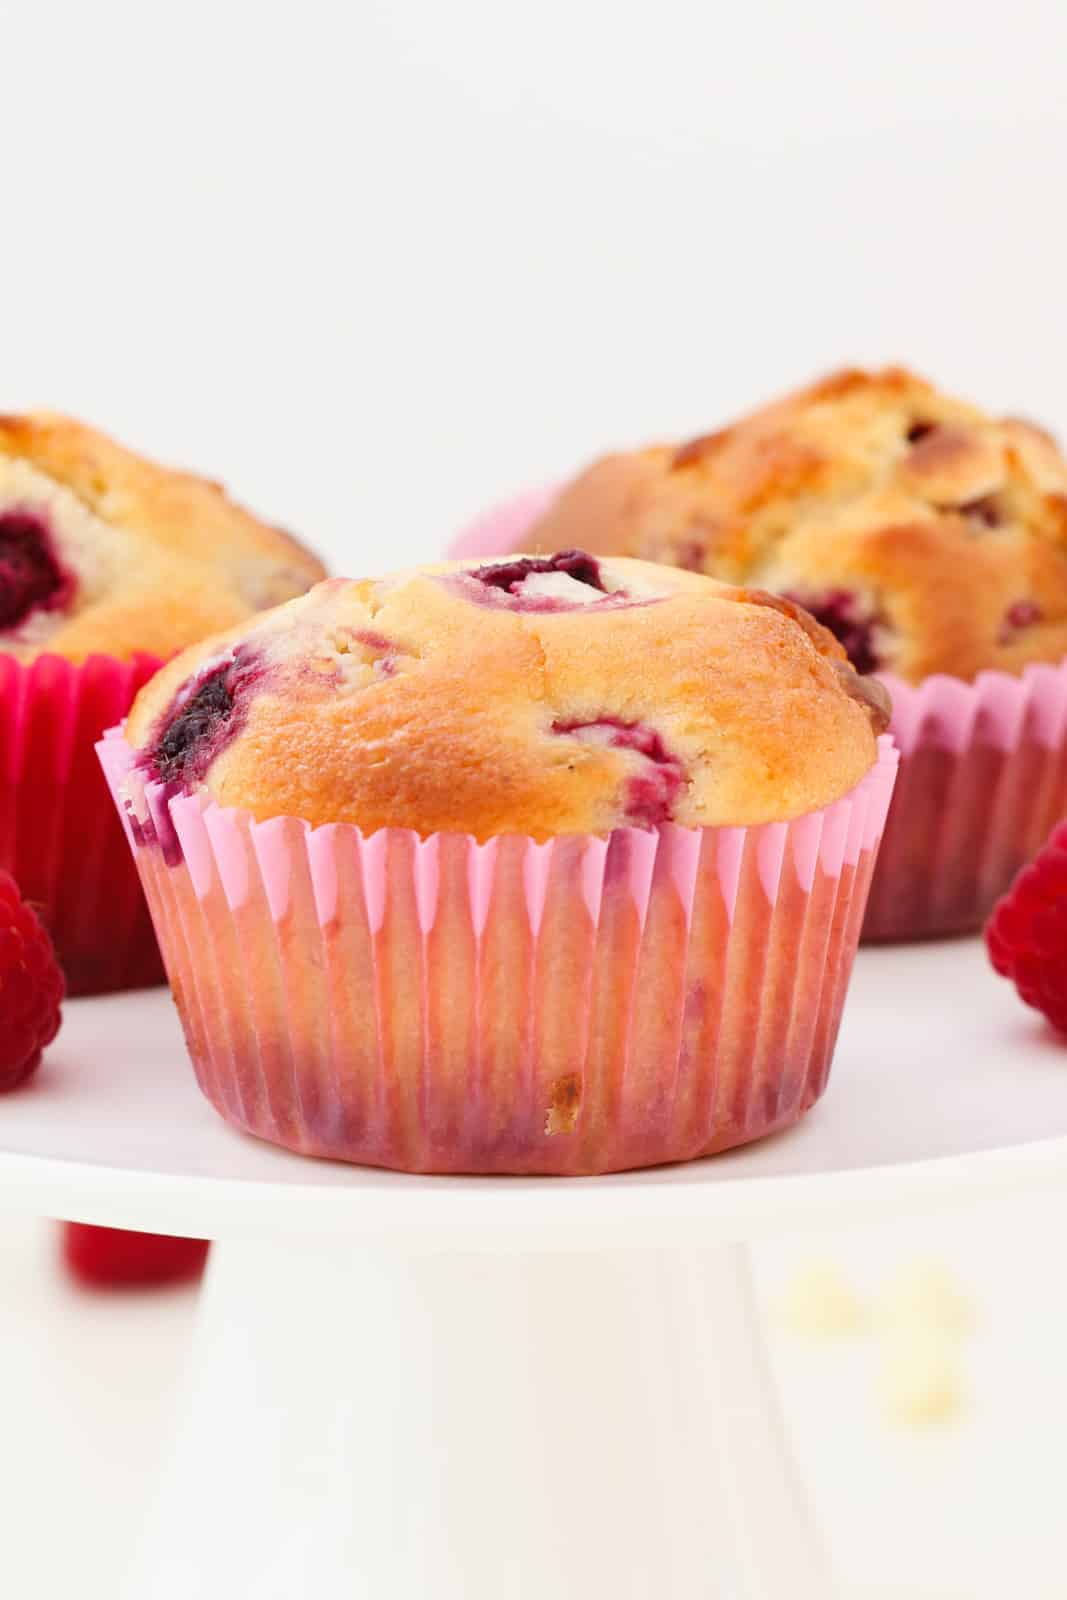 Muffins with raspberries and white chocolate chunks in pink muffin case liners.